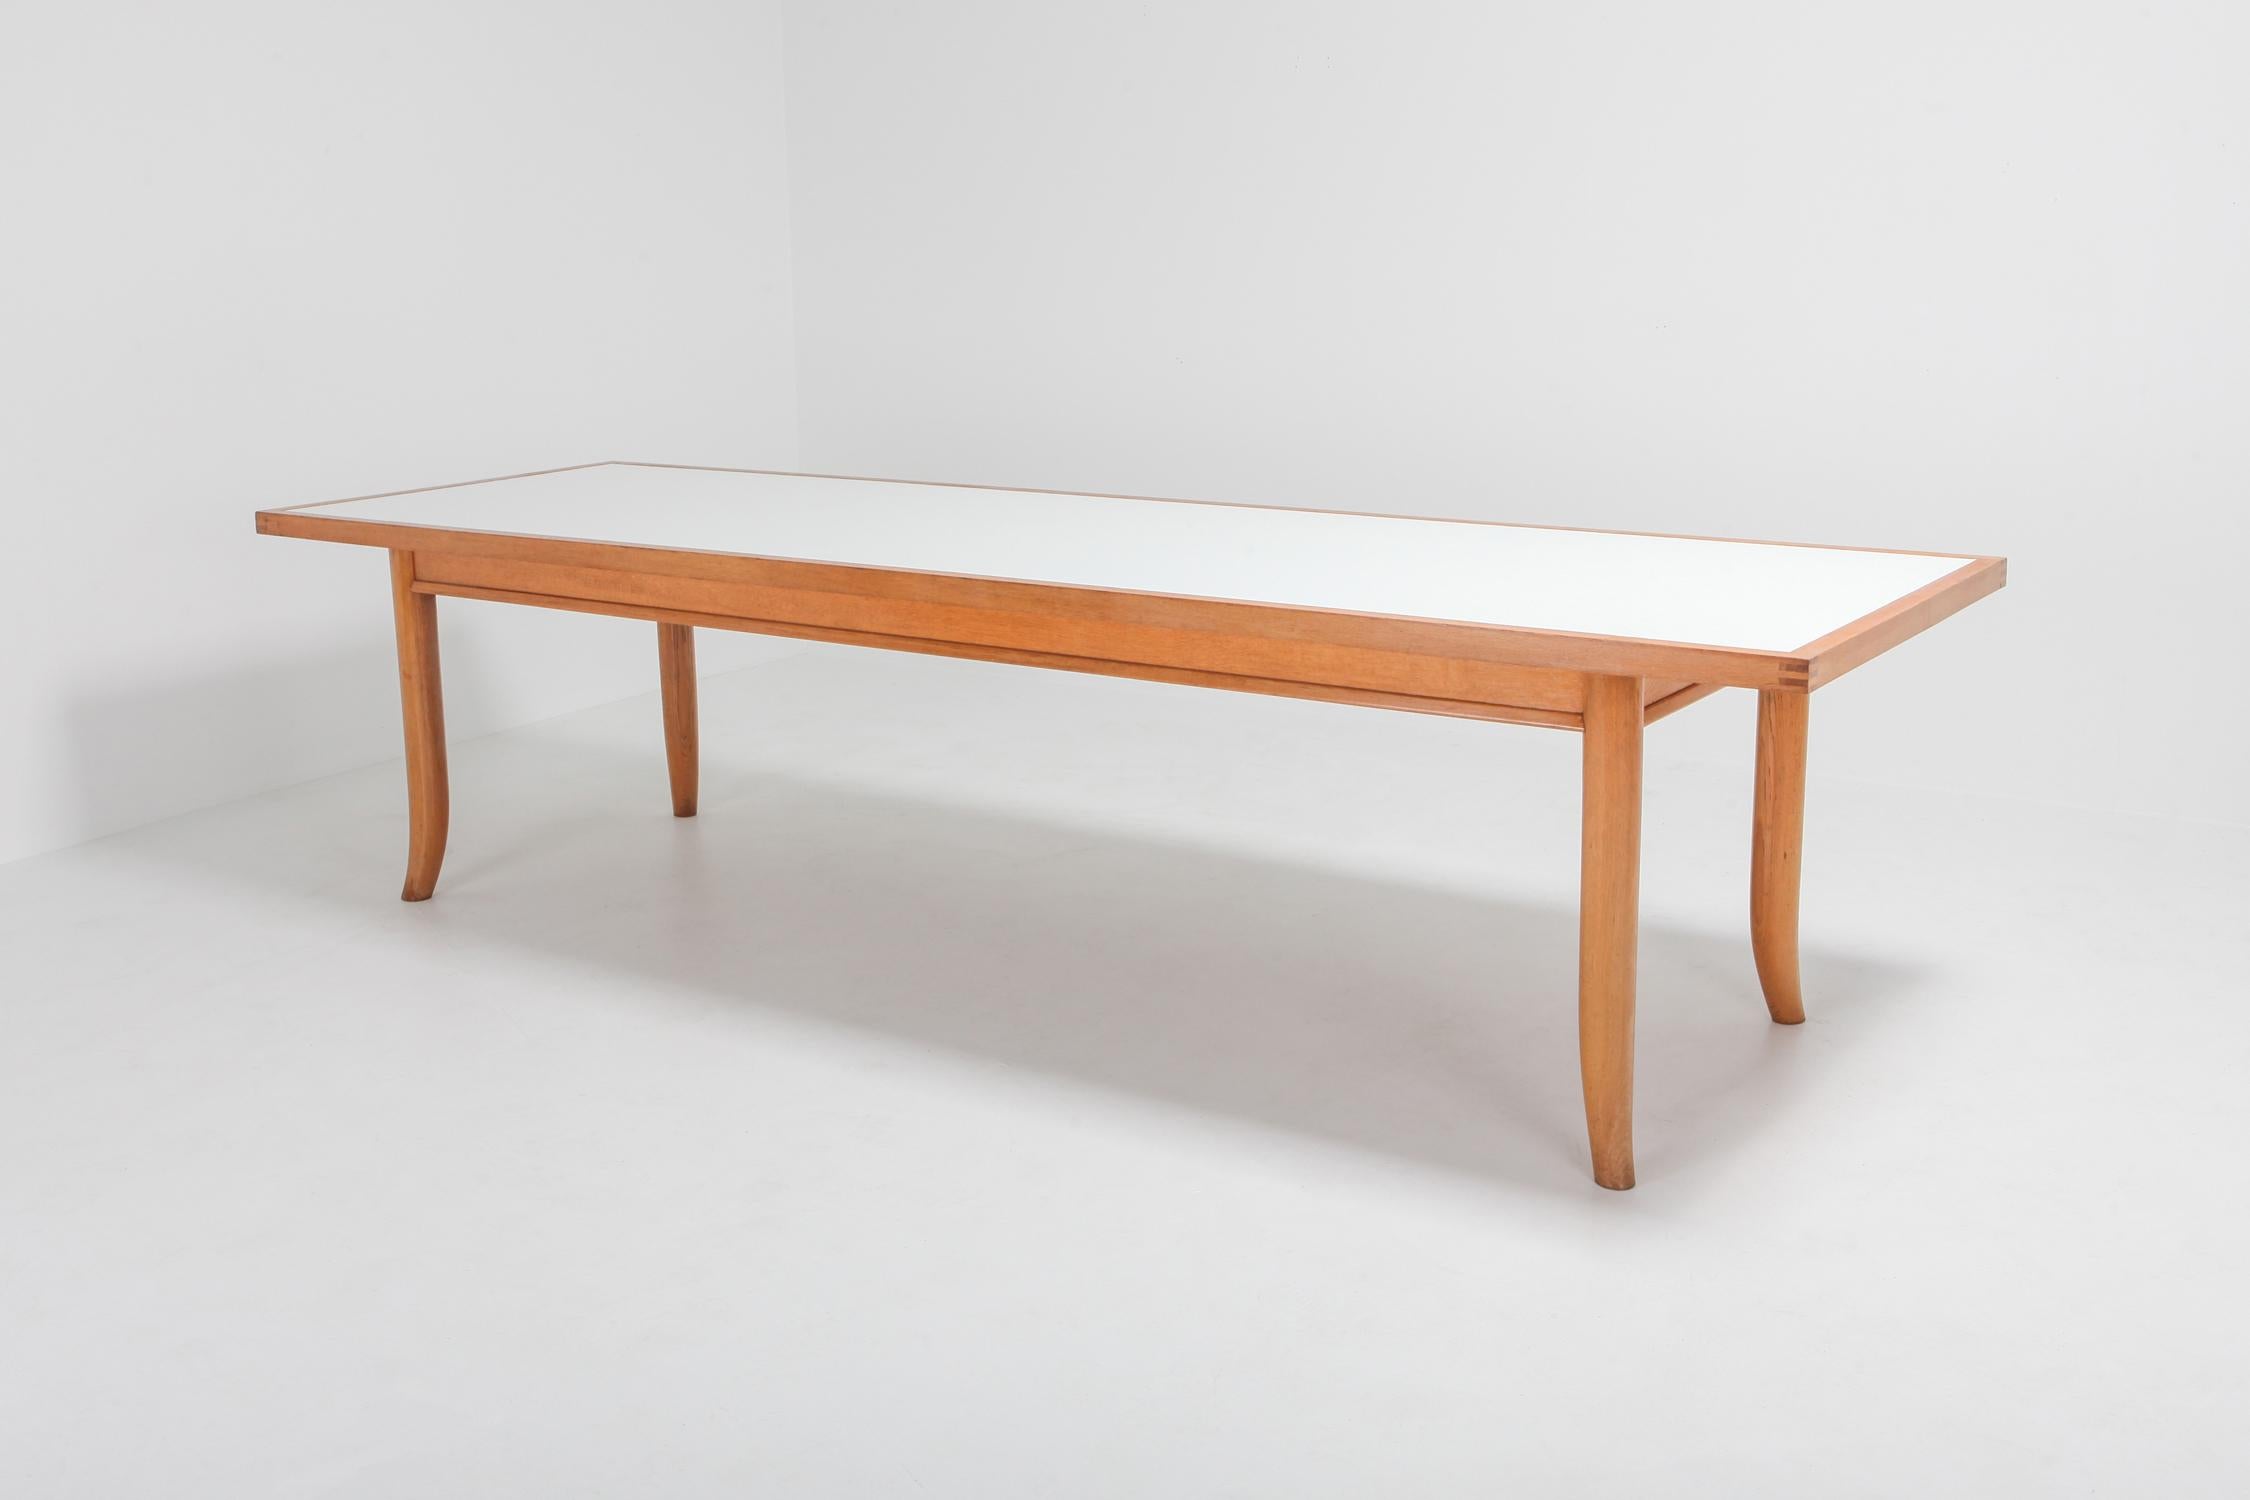 George Nakashima style over size oak dining table has been made in Japan, designed by Robsjohn Gibbings.
Robsjohn Gibbings worked for the same company as Nakashima called Widdicomb. 
This particular piece is more high-end than the Widdicomb